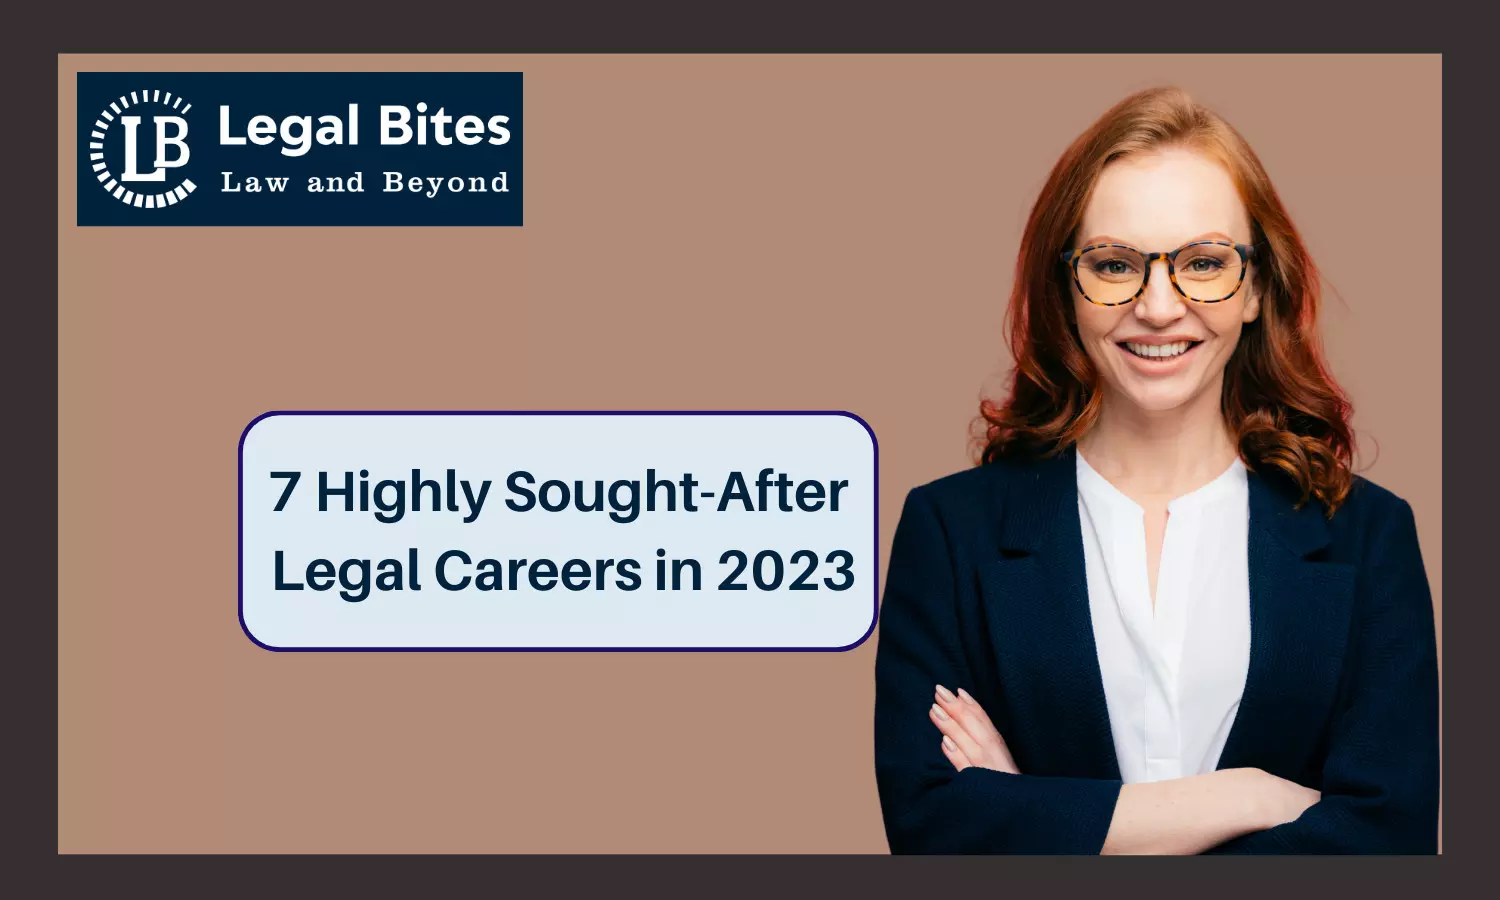 7 Highly Sought-After Legal Careers in 2023